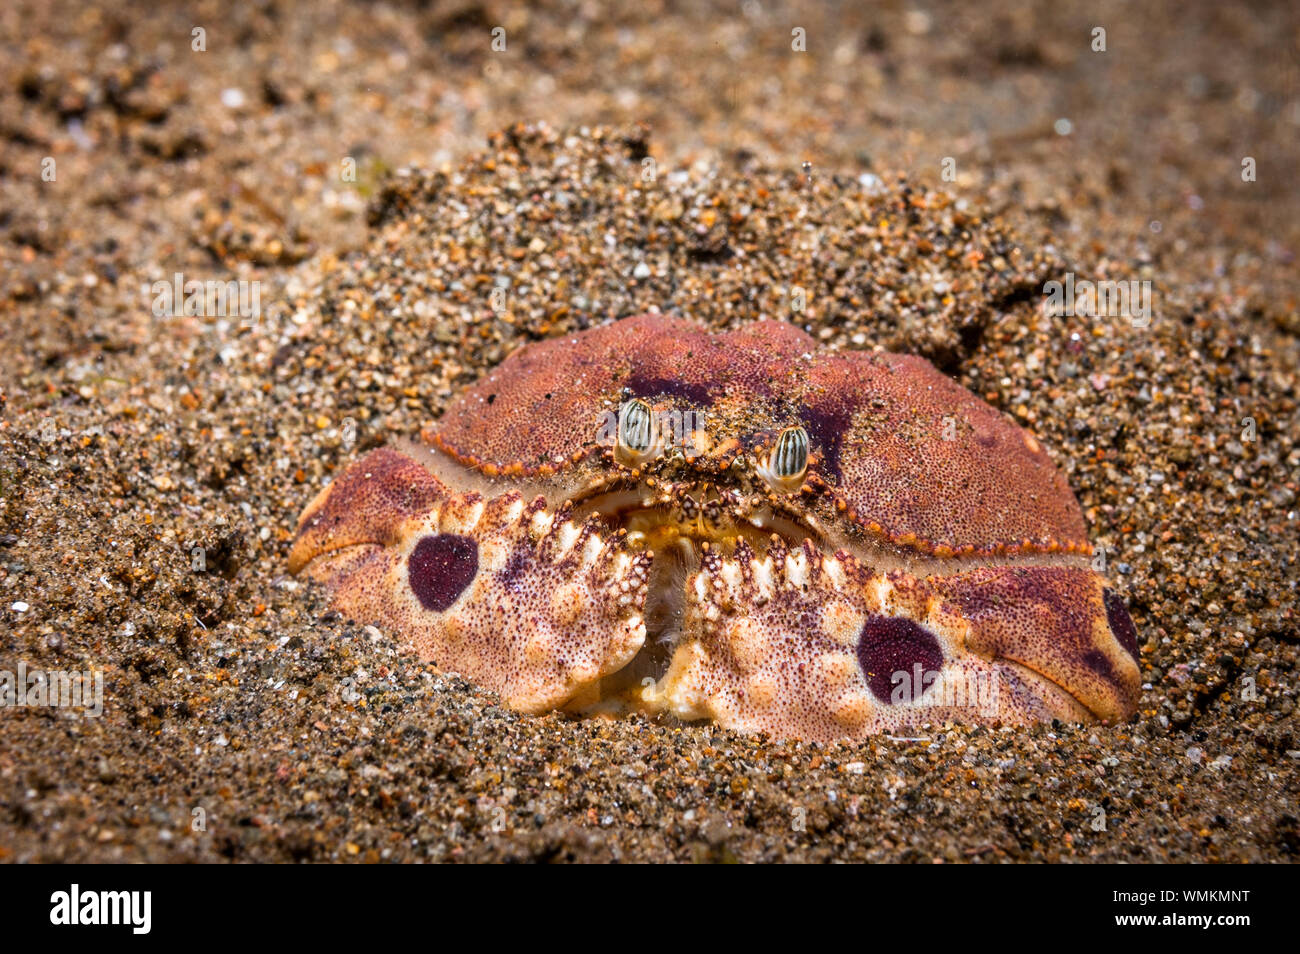 Spectacled box crab Stock Photo